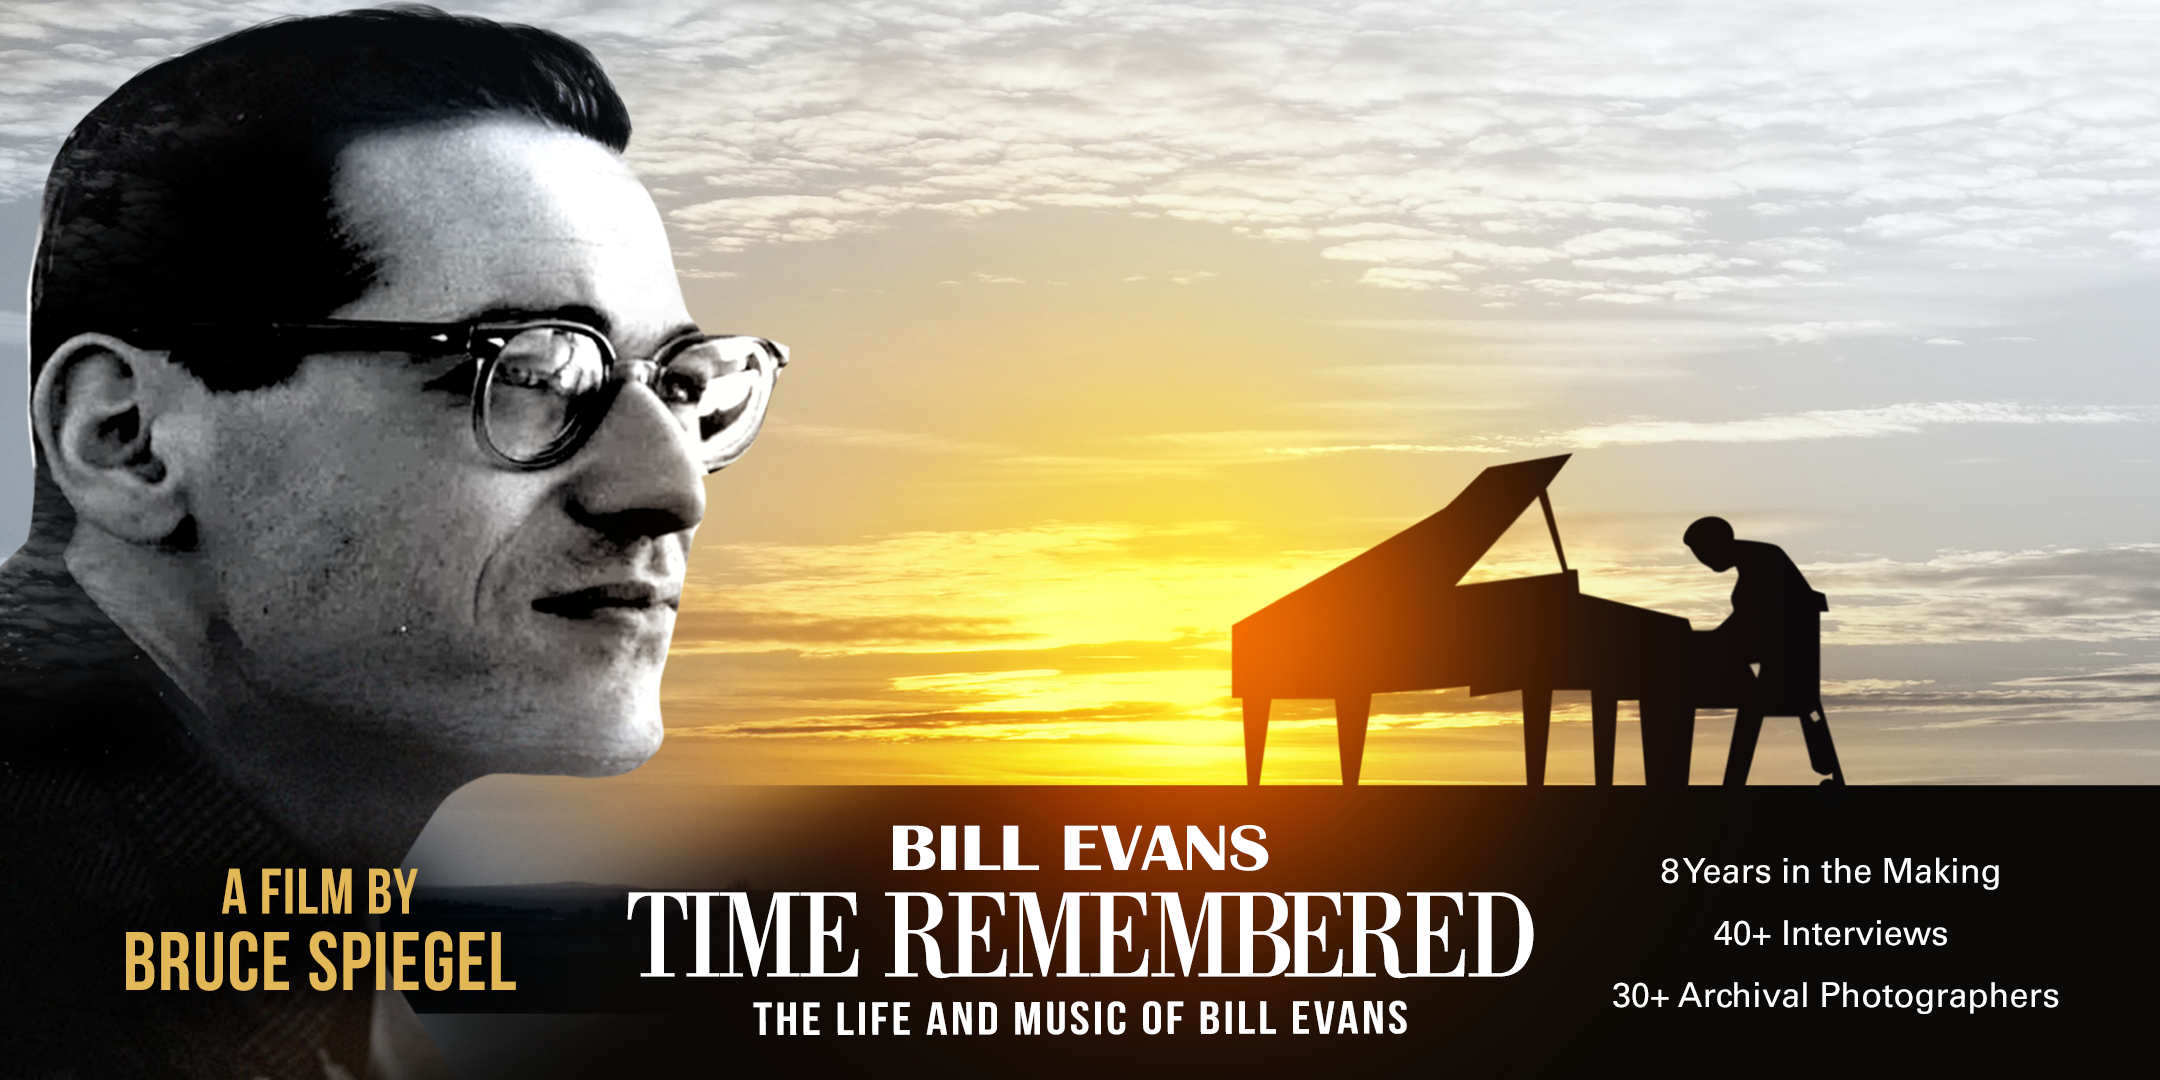 「Bill Evans Time Remembered DVD - Life And Music Of Bill Evans」の画像検索結果